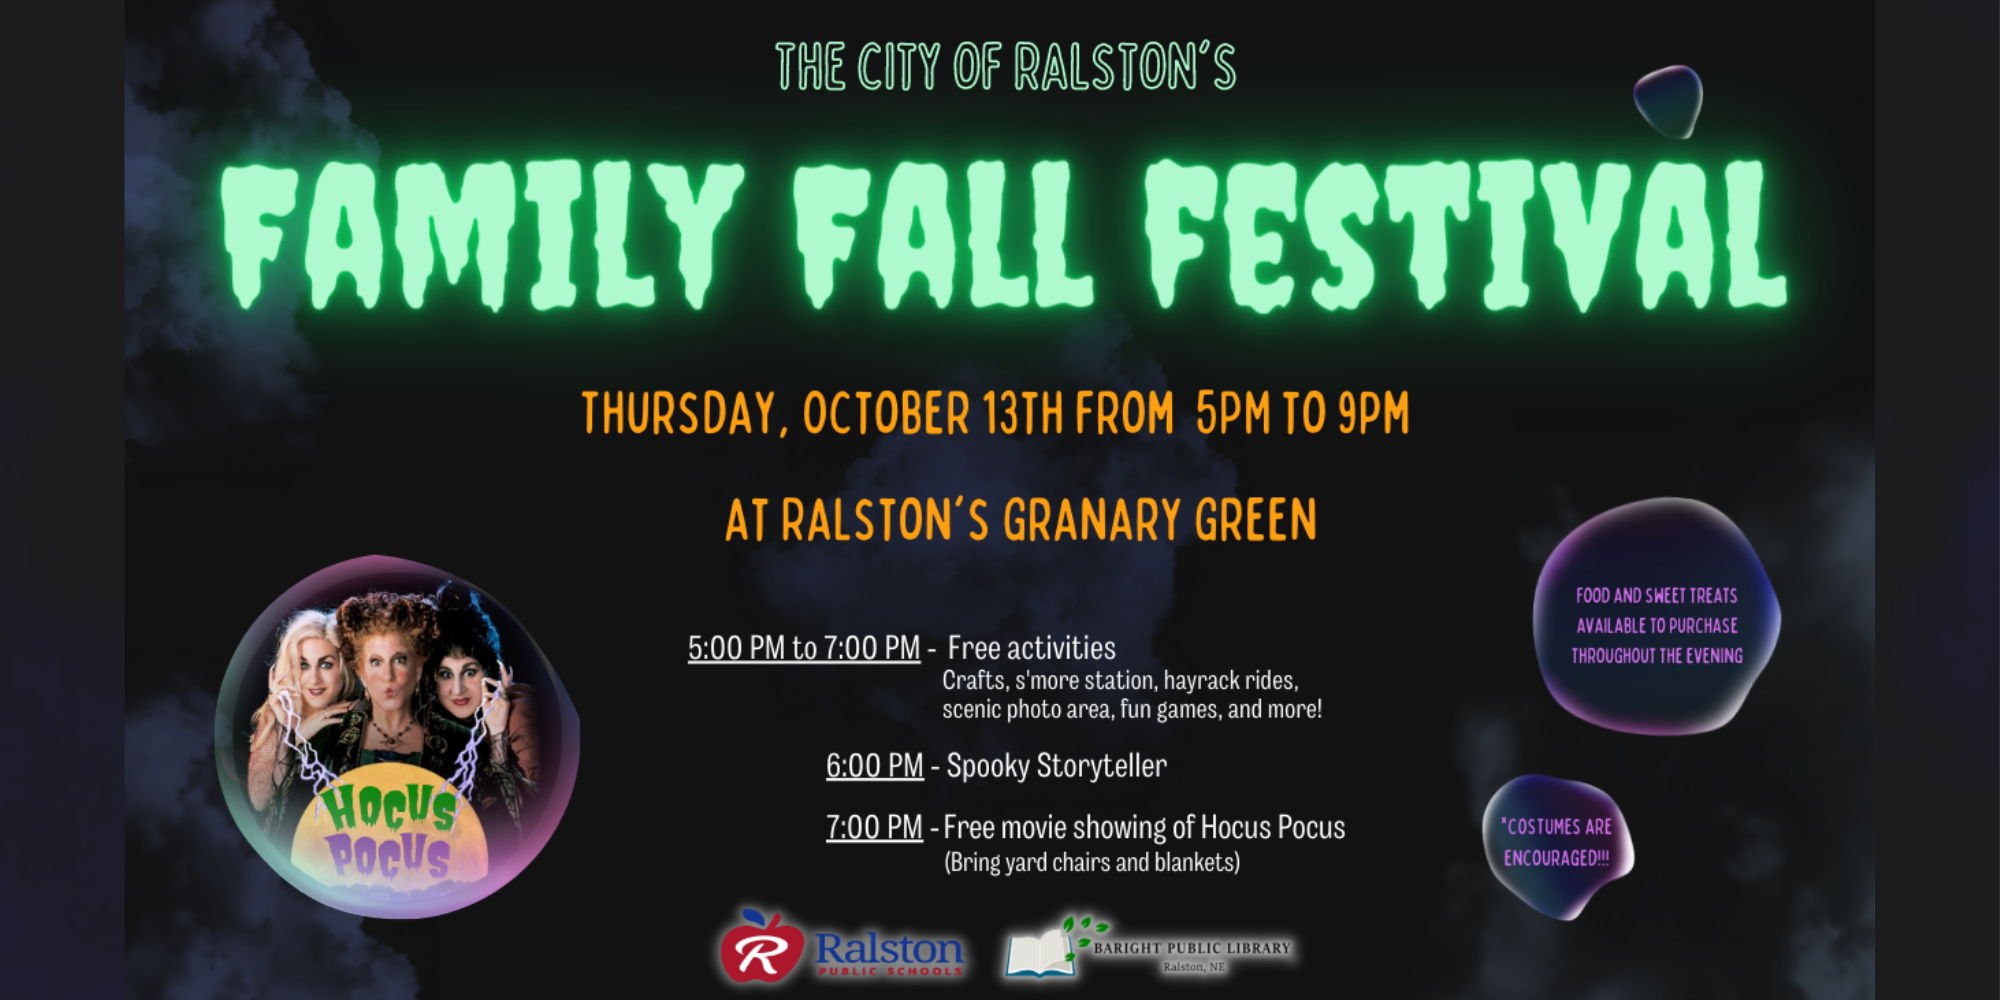 The City of Ralston's Family Fall Festival promotional image